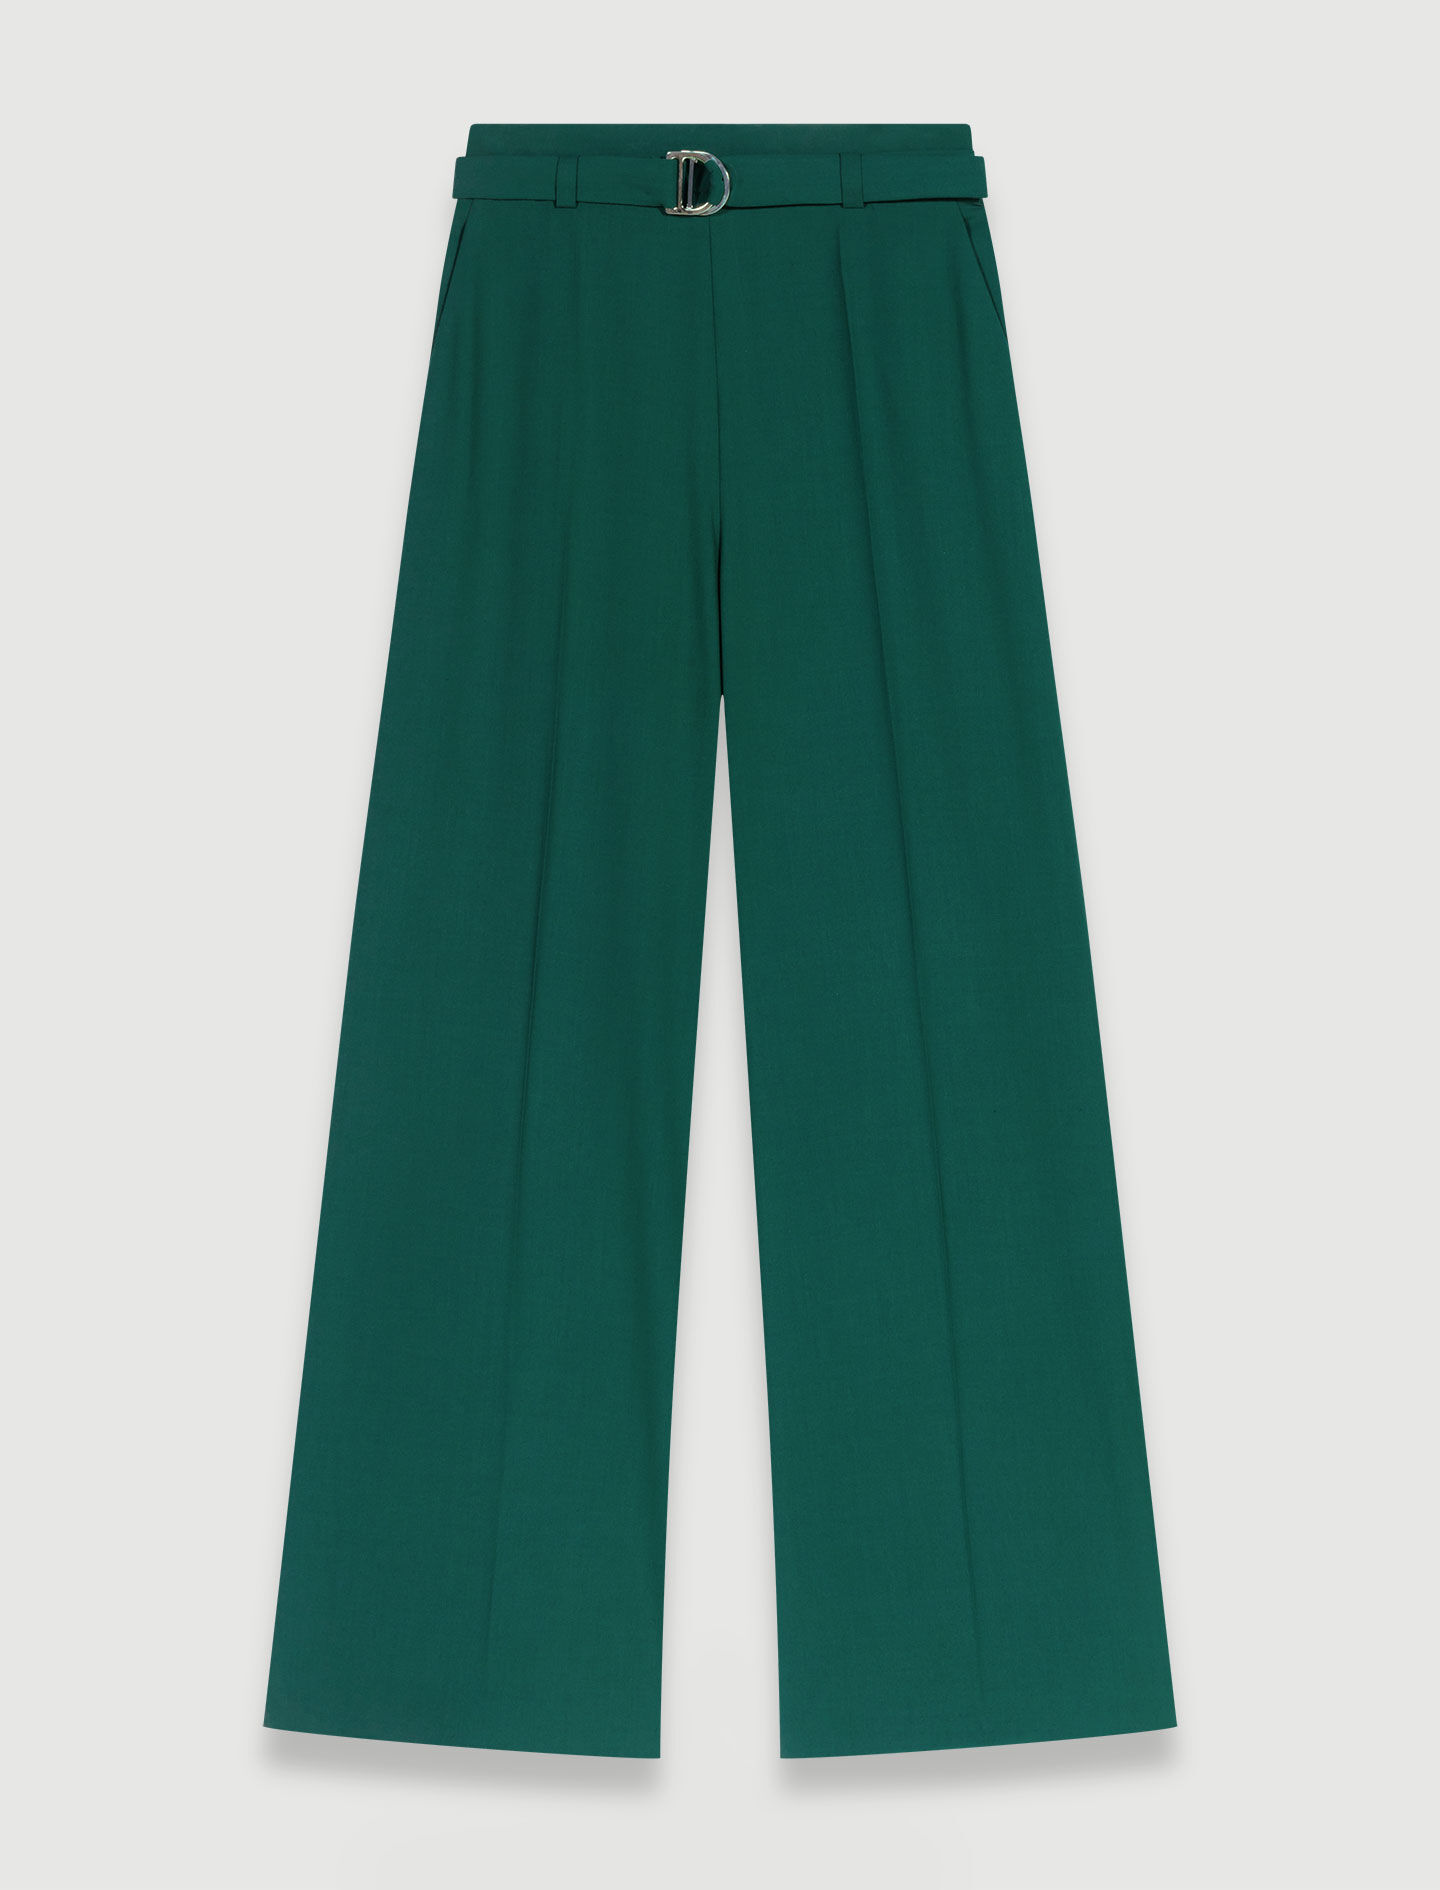 Buy Green Trousers & Pants for Men by SOLEMIO Online | Ajio.com